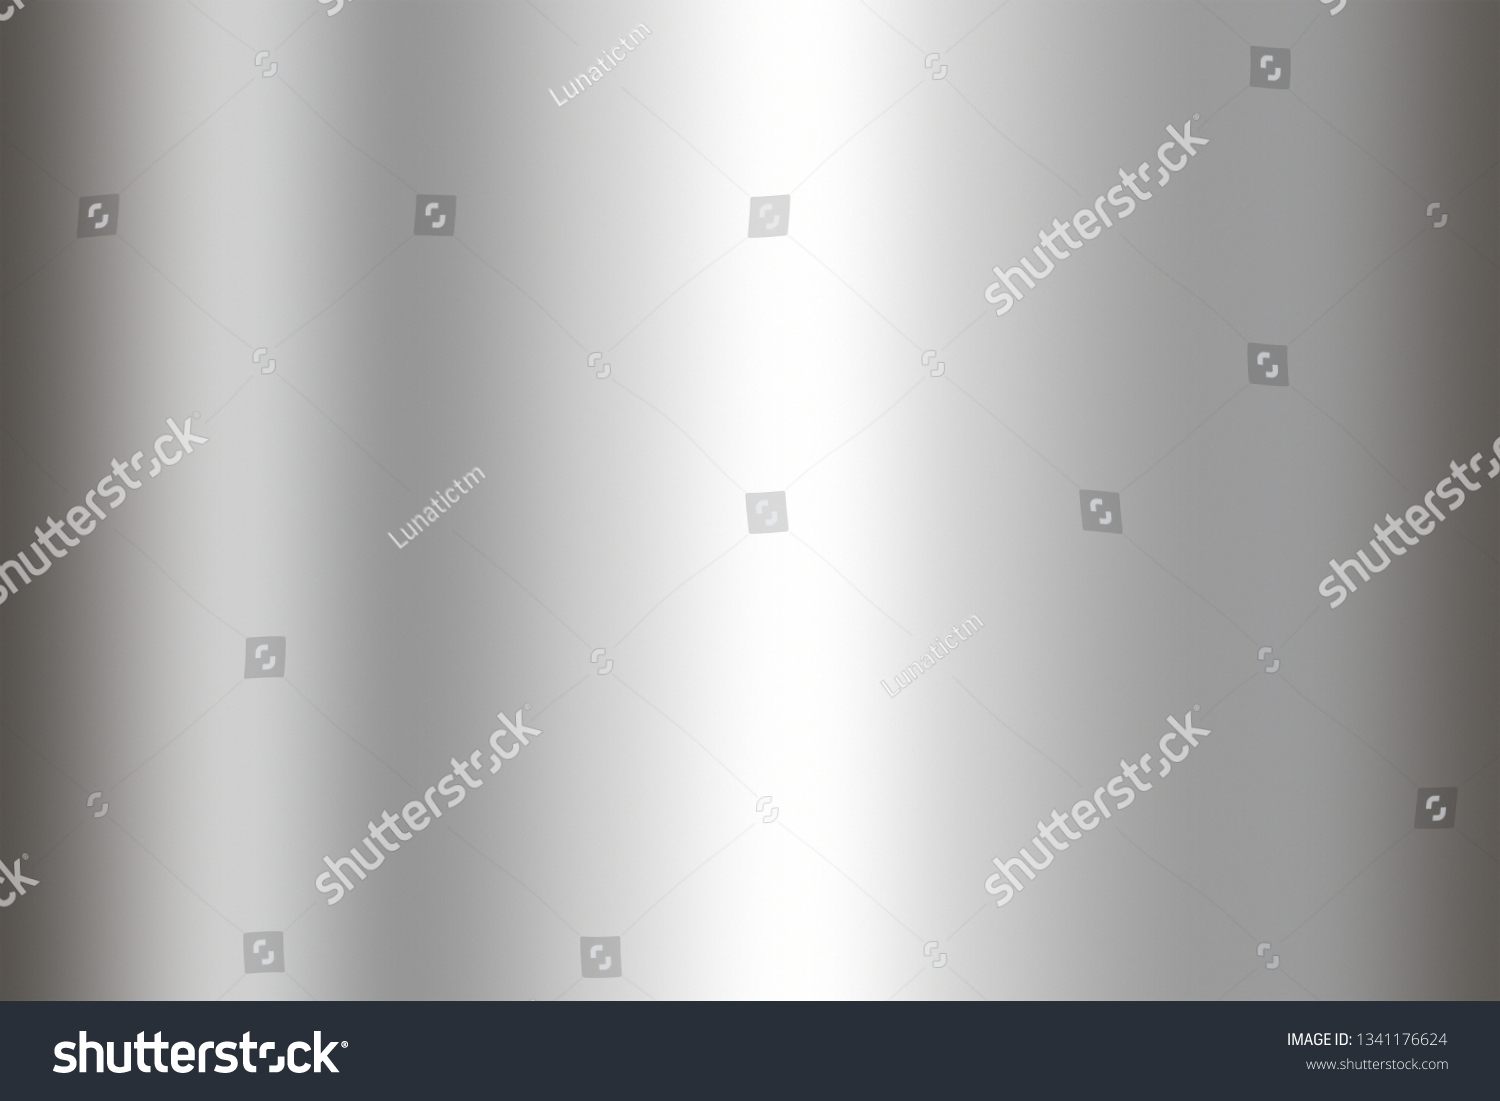 Stainless steel texture background. Shiny surface of metal sheet. #1341176624